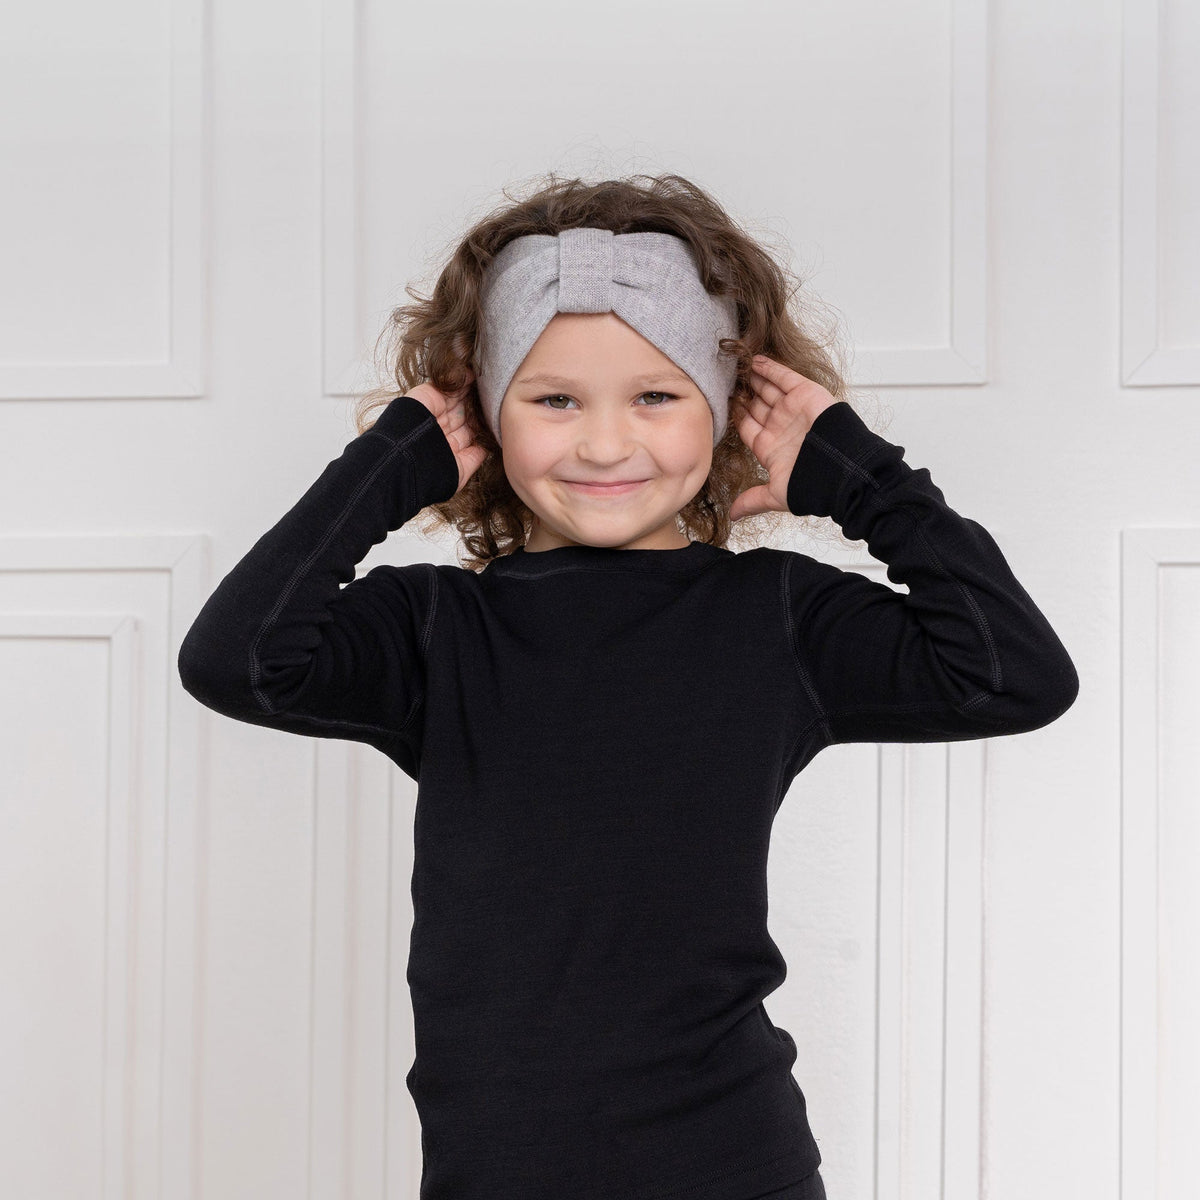 MENIQUE Knit Girls Headband with Ribbon Cashmere Blend